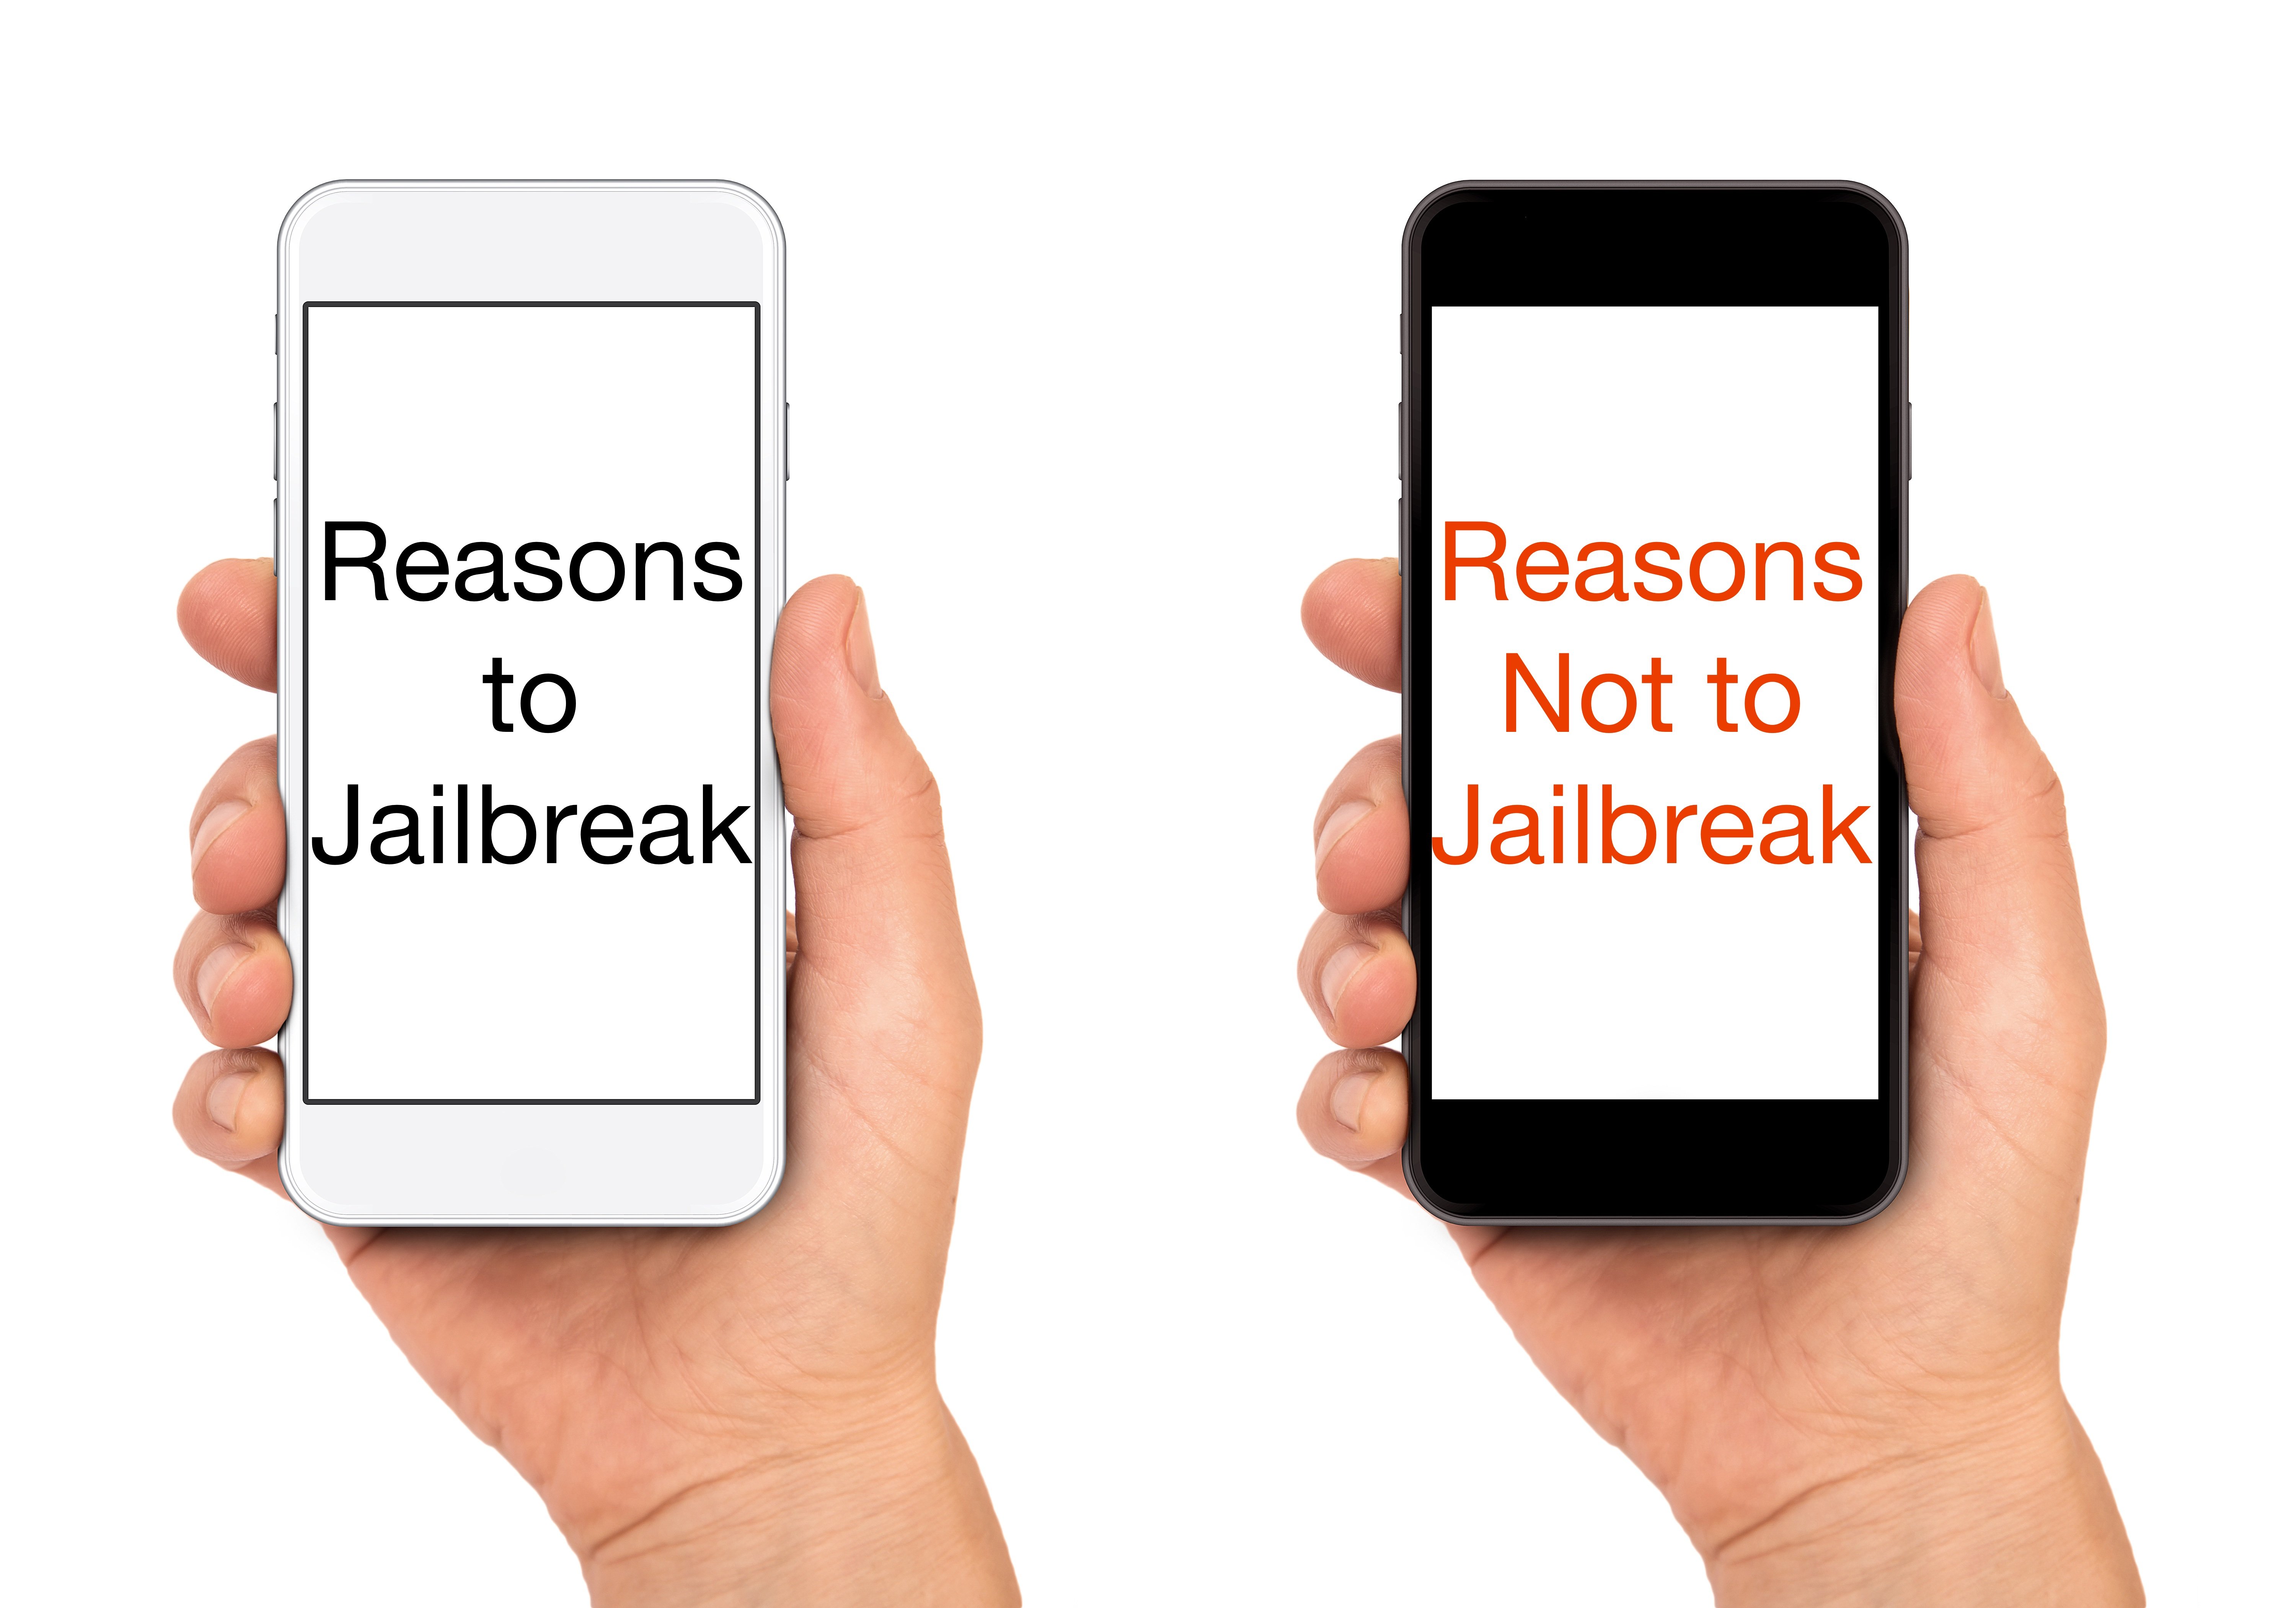 Here are the reasons to jailbreak and the reasons not to jailbreak.